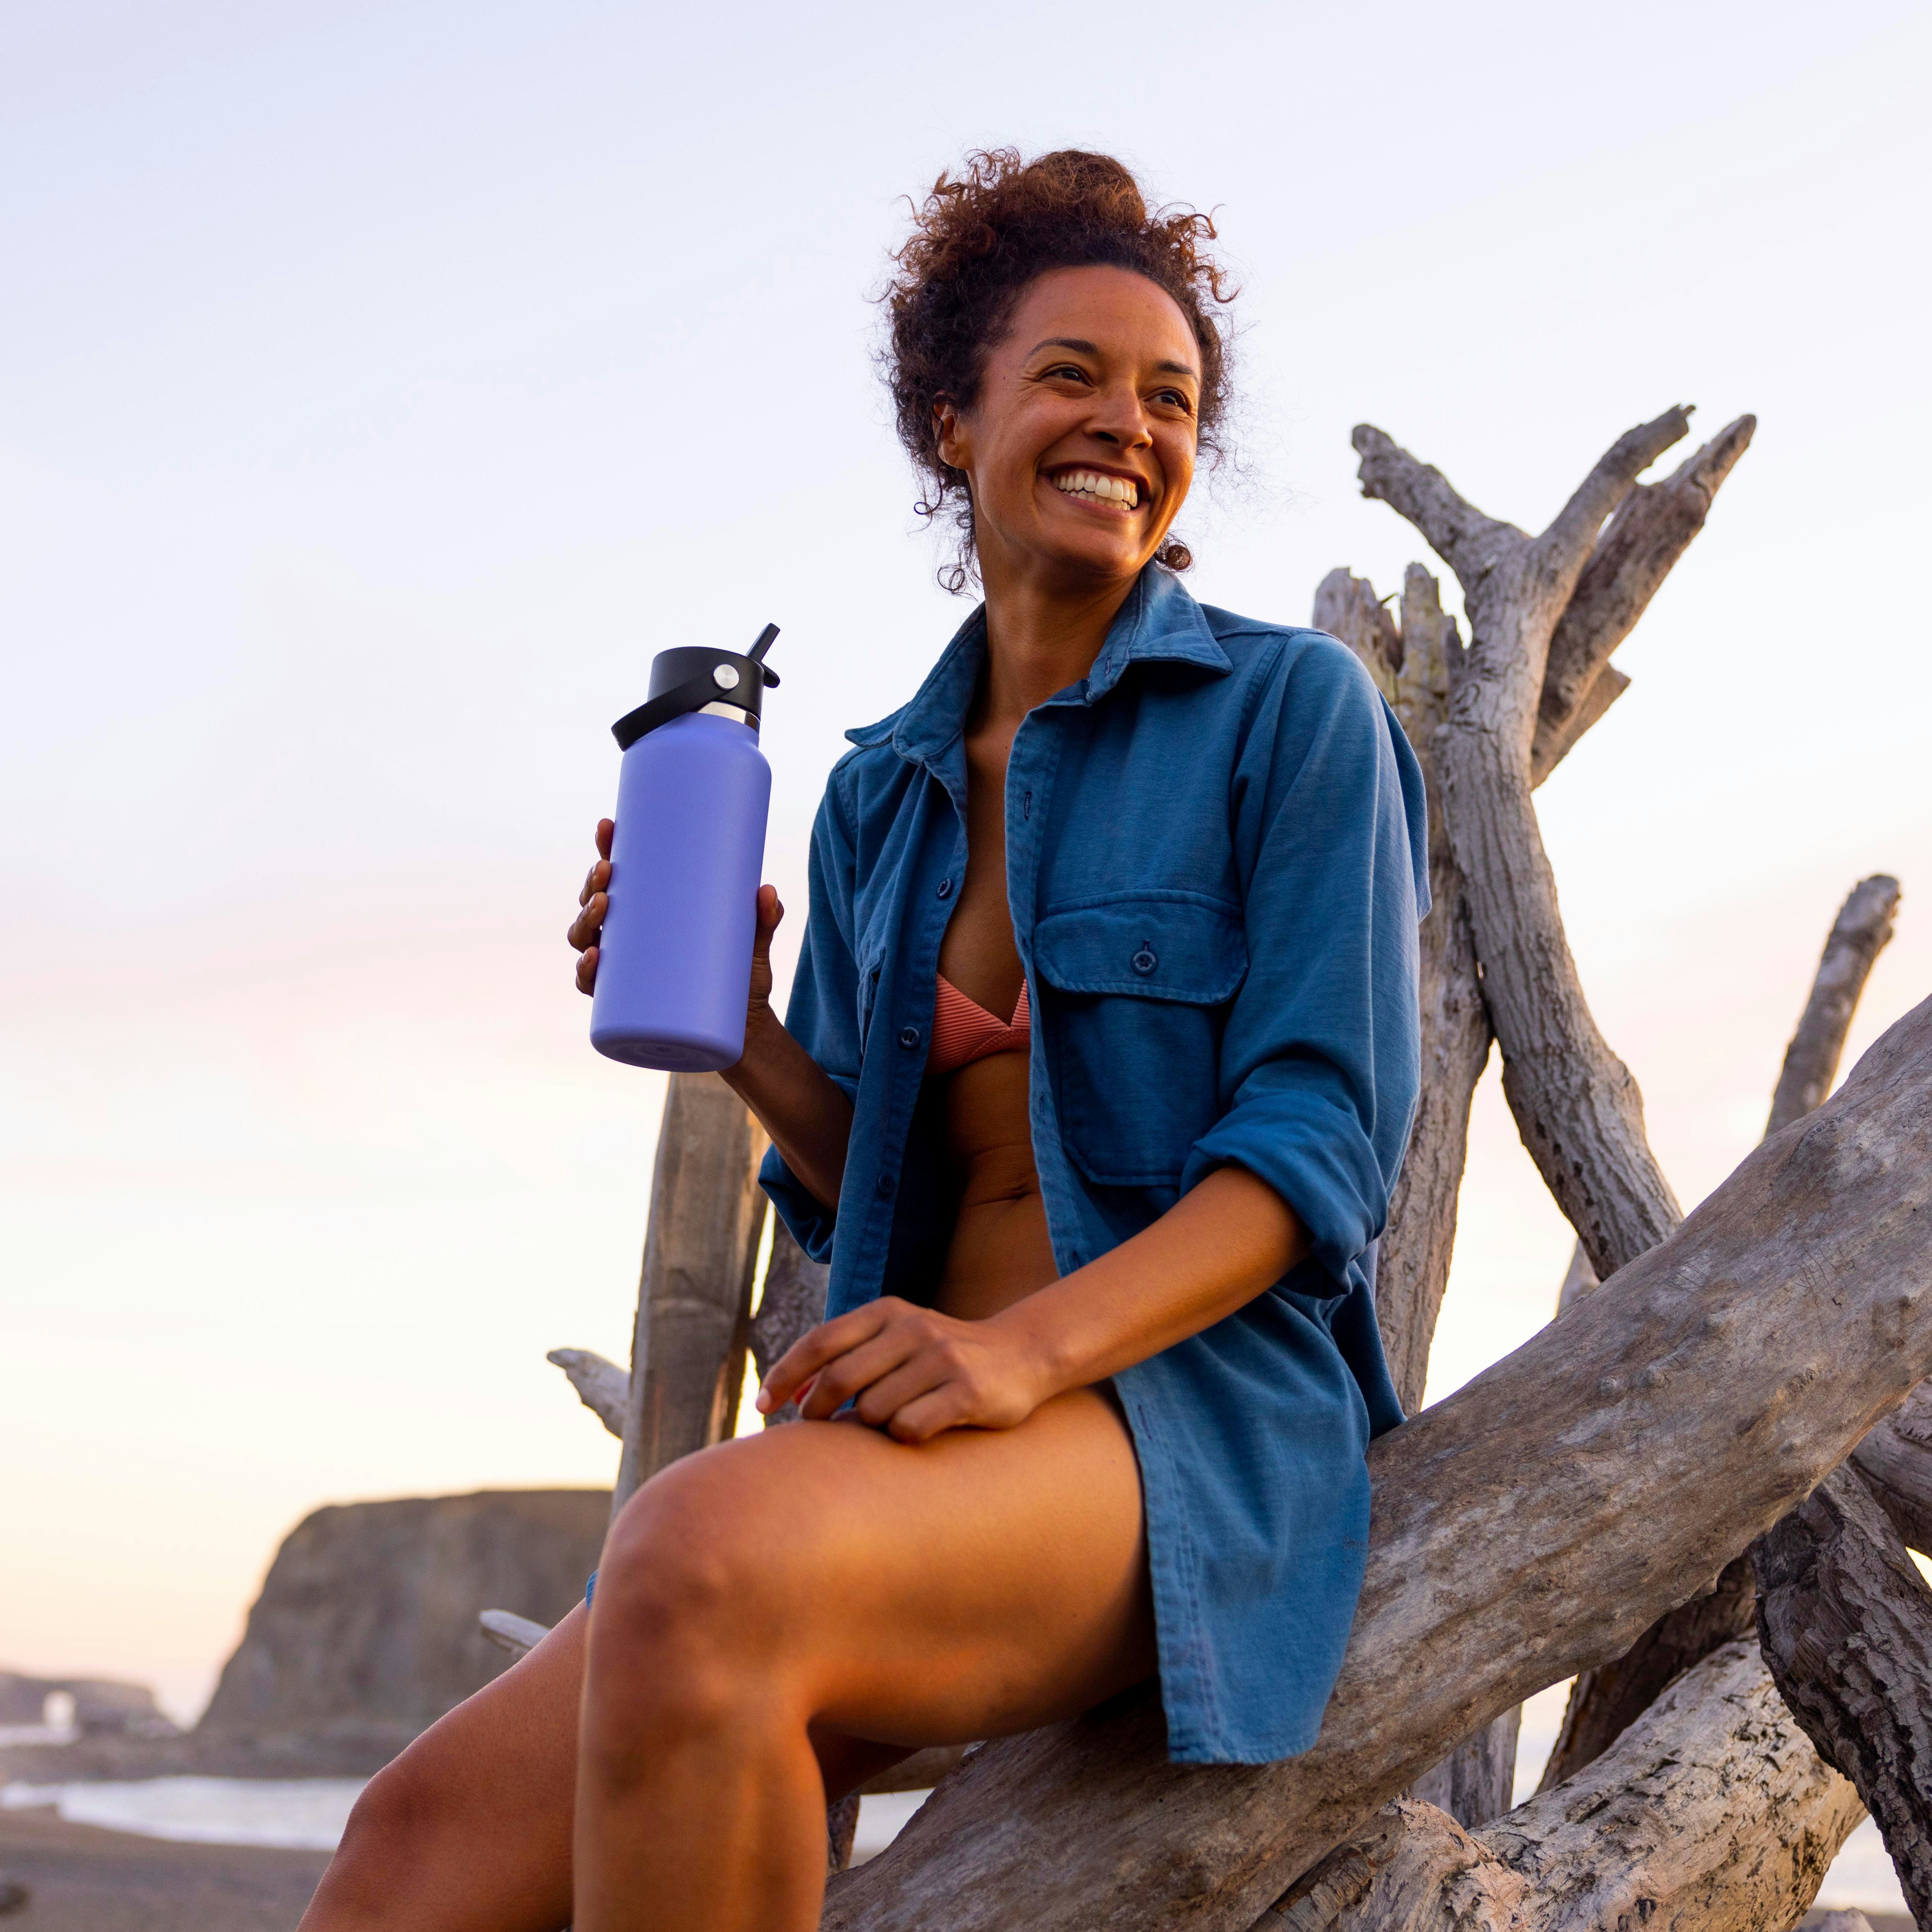 Women smiling with her purple Hydro Flask drink bottle at the beach at sunset sitting on a log. 